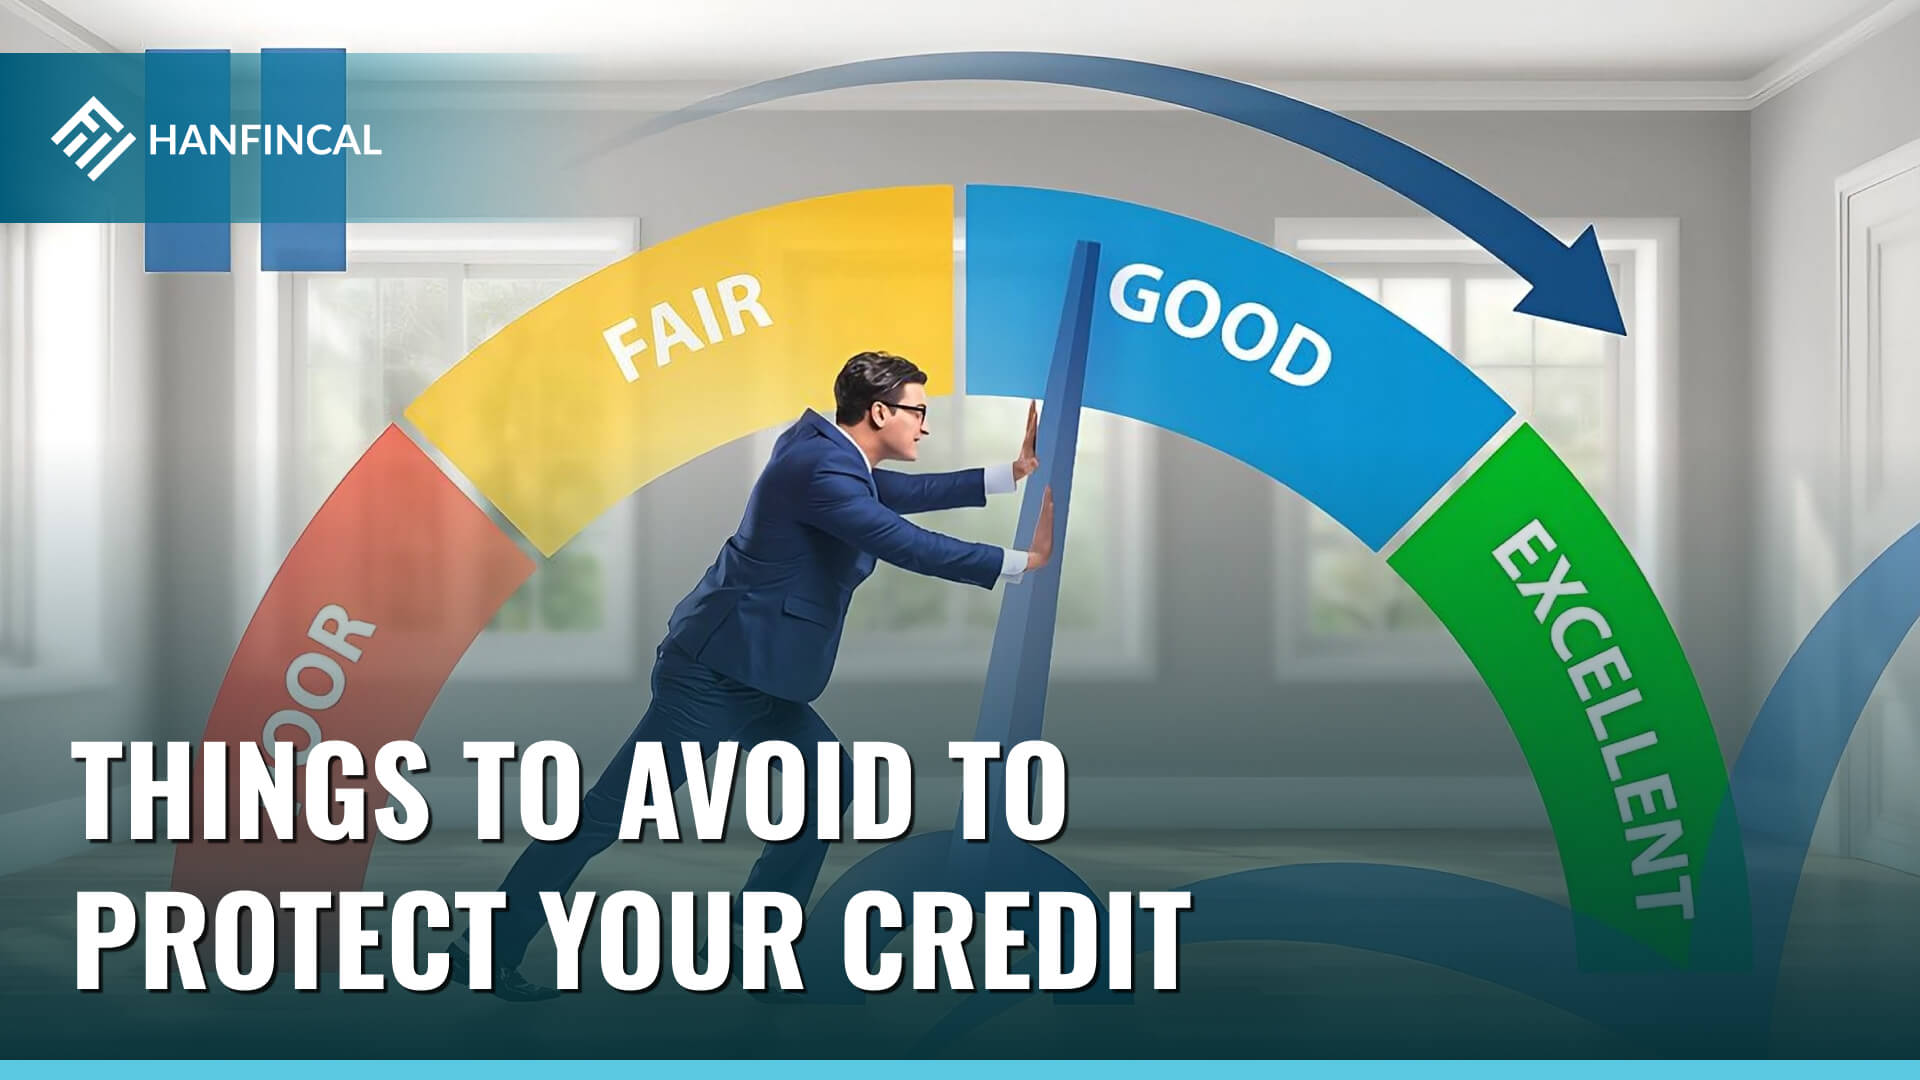 Things to avoid to protect your credit